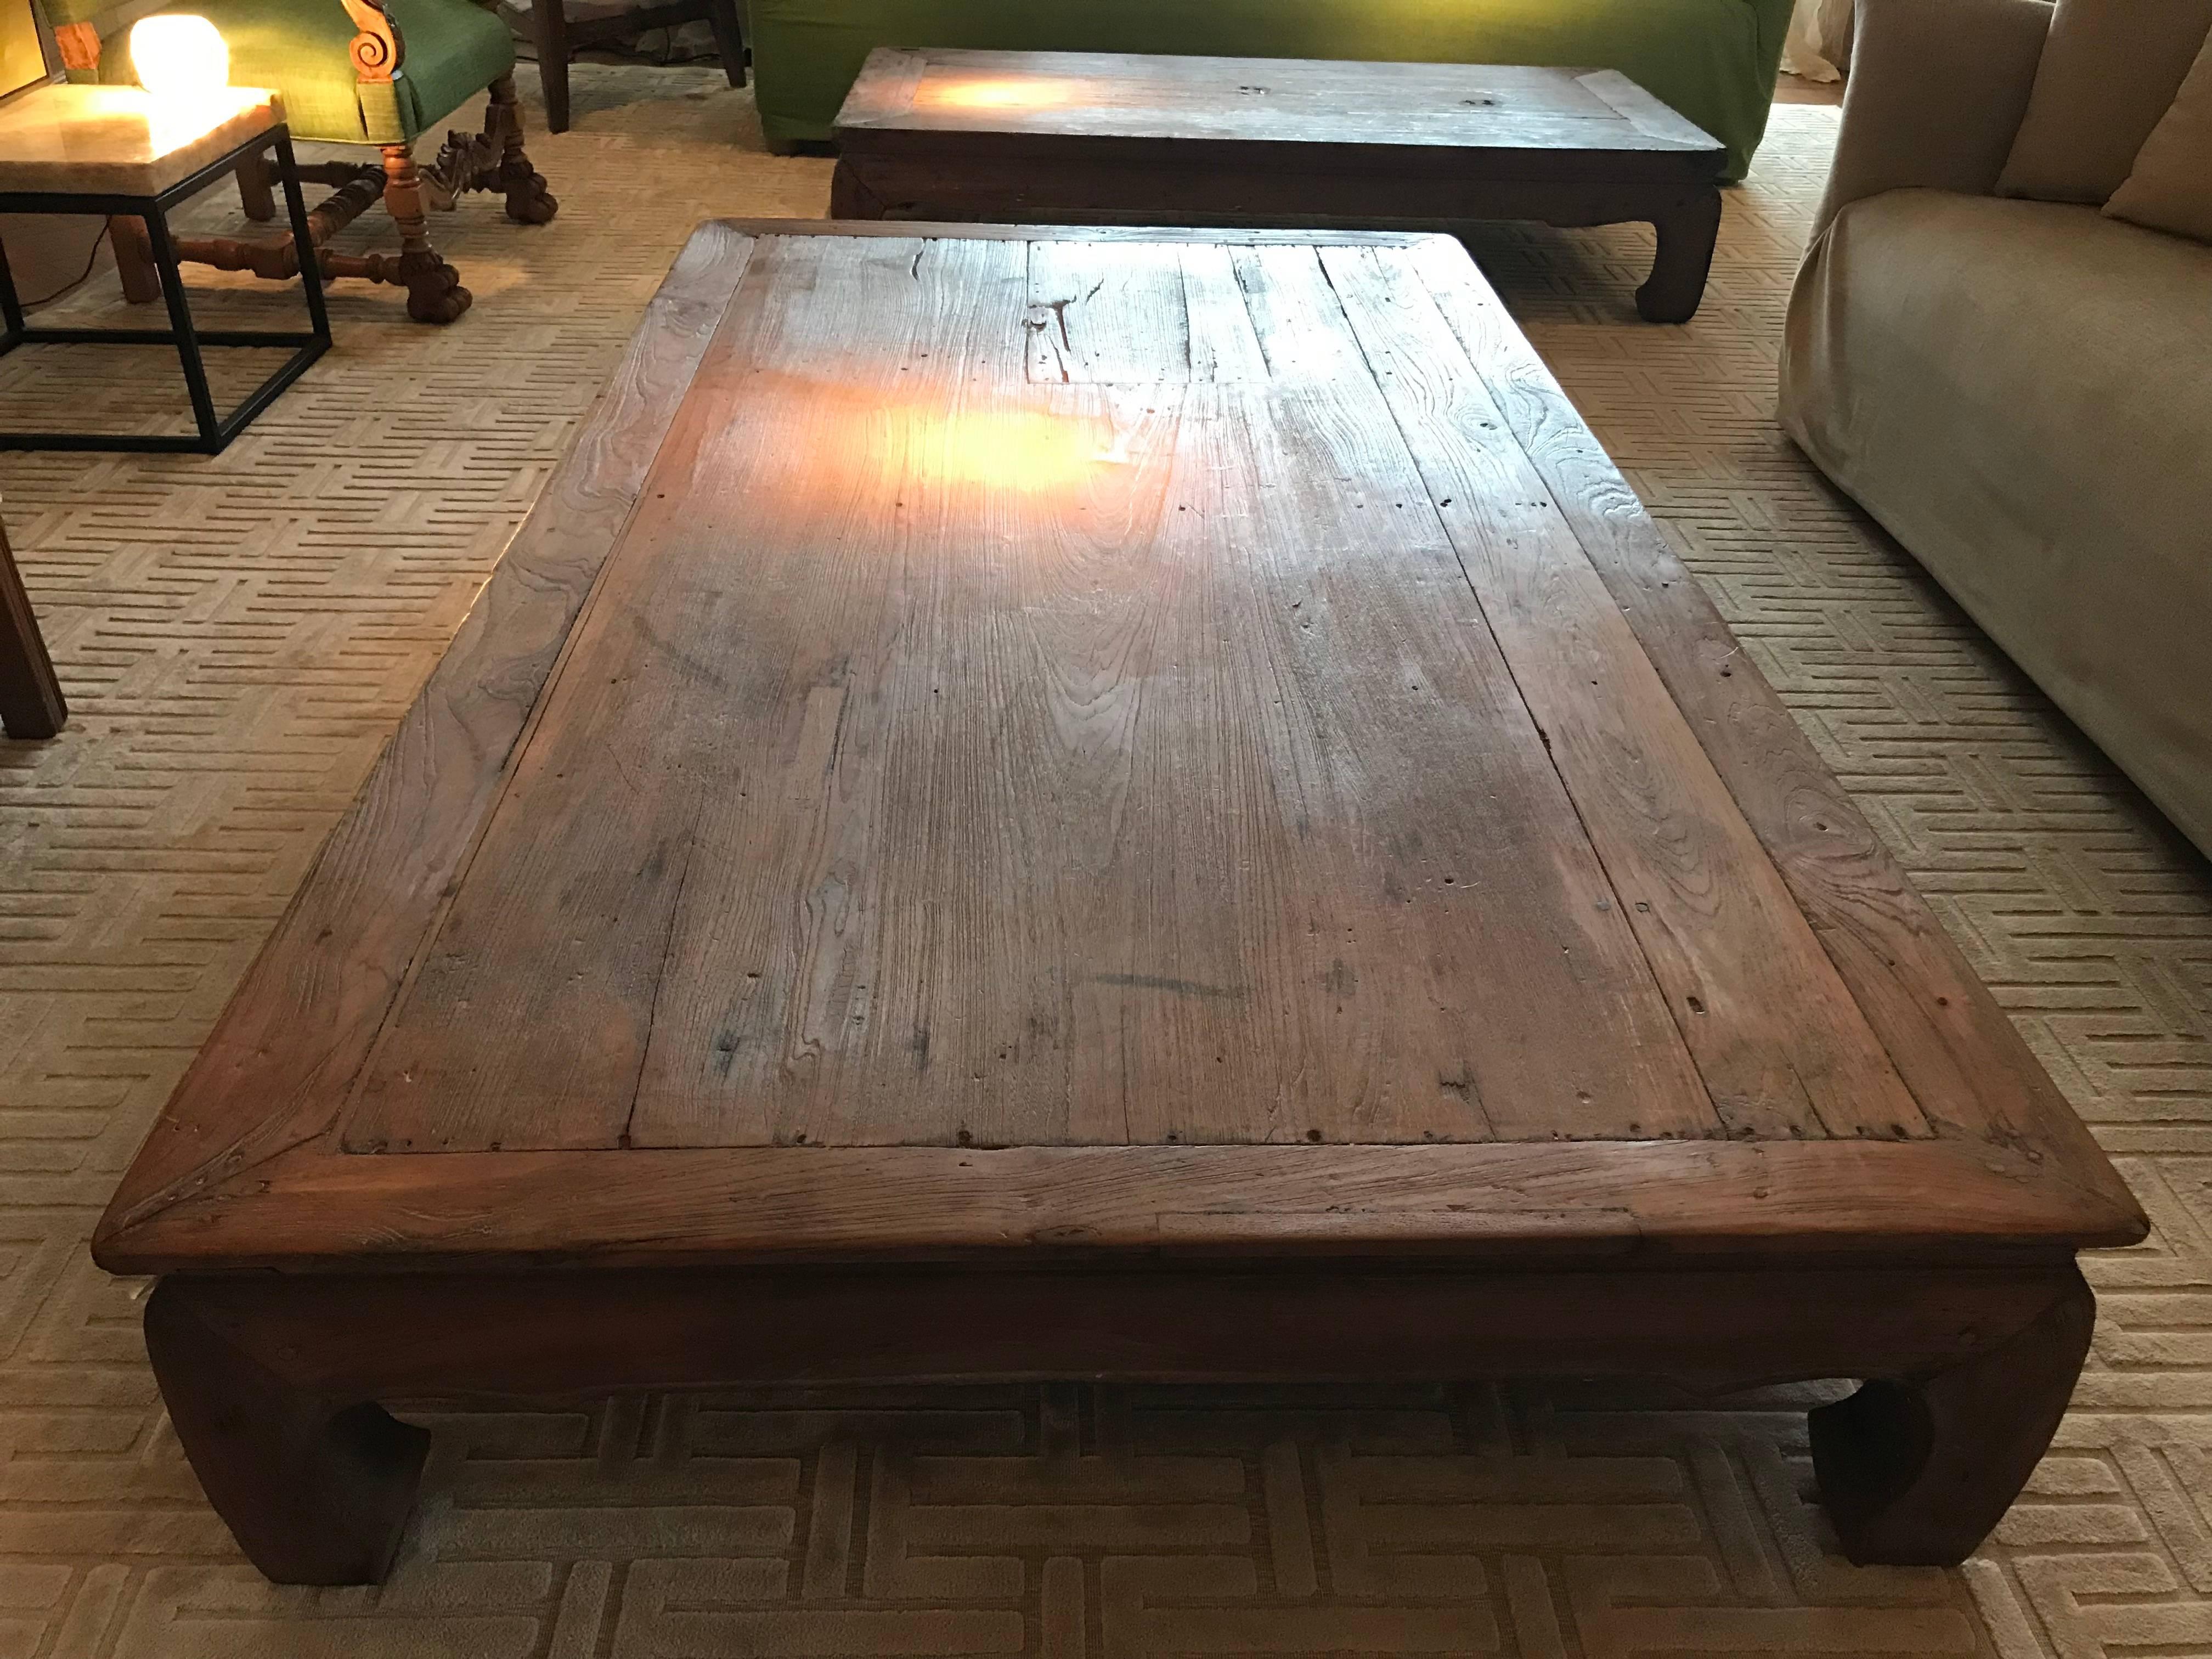 Large coffee table in teak wood
with nice old patina
Southeast Asia, Thailand.